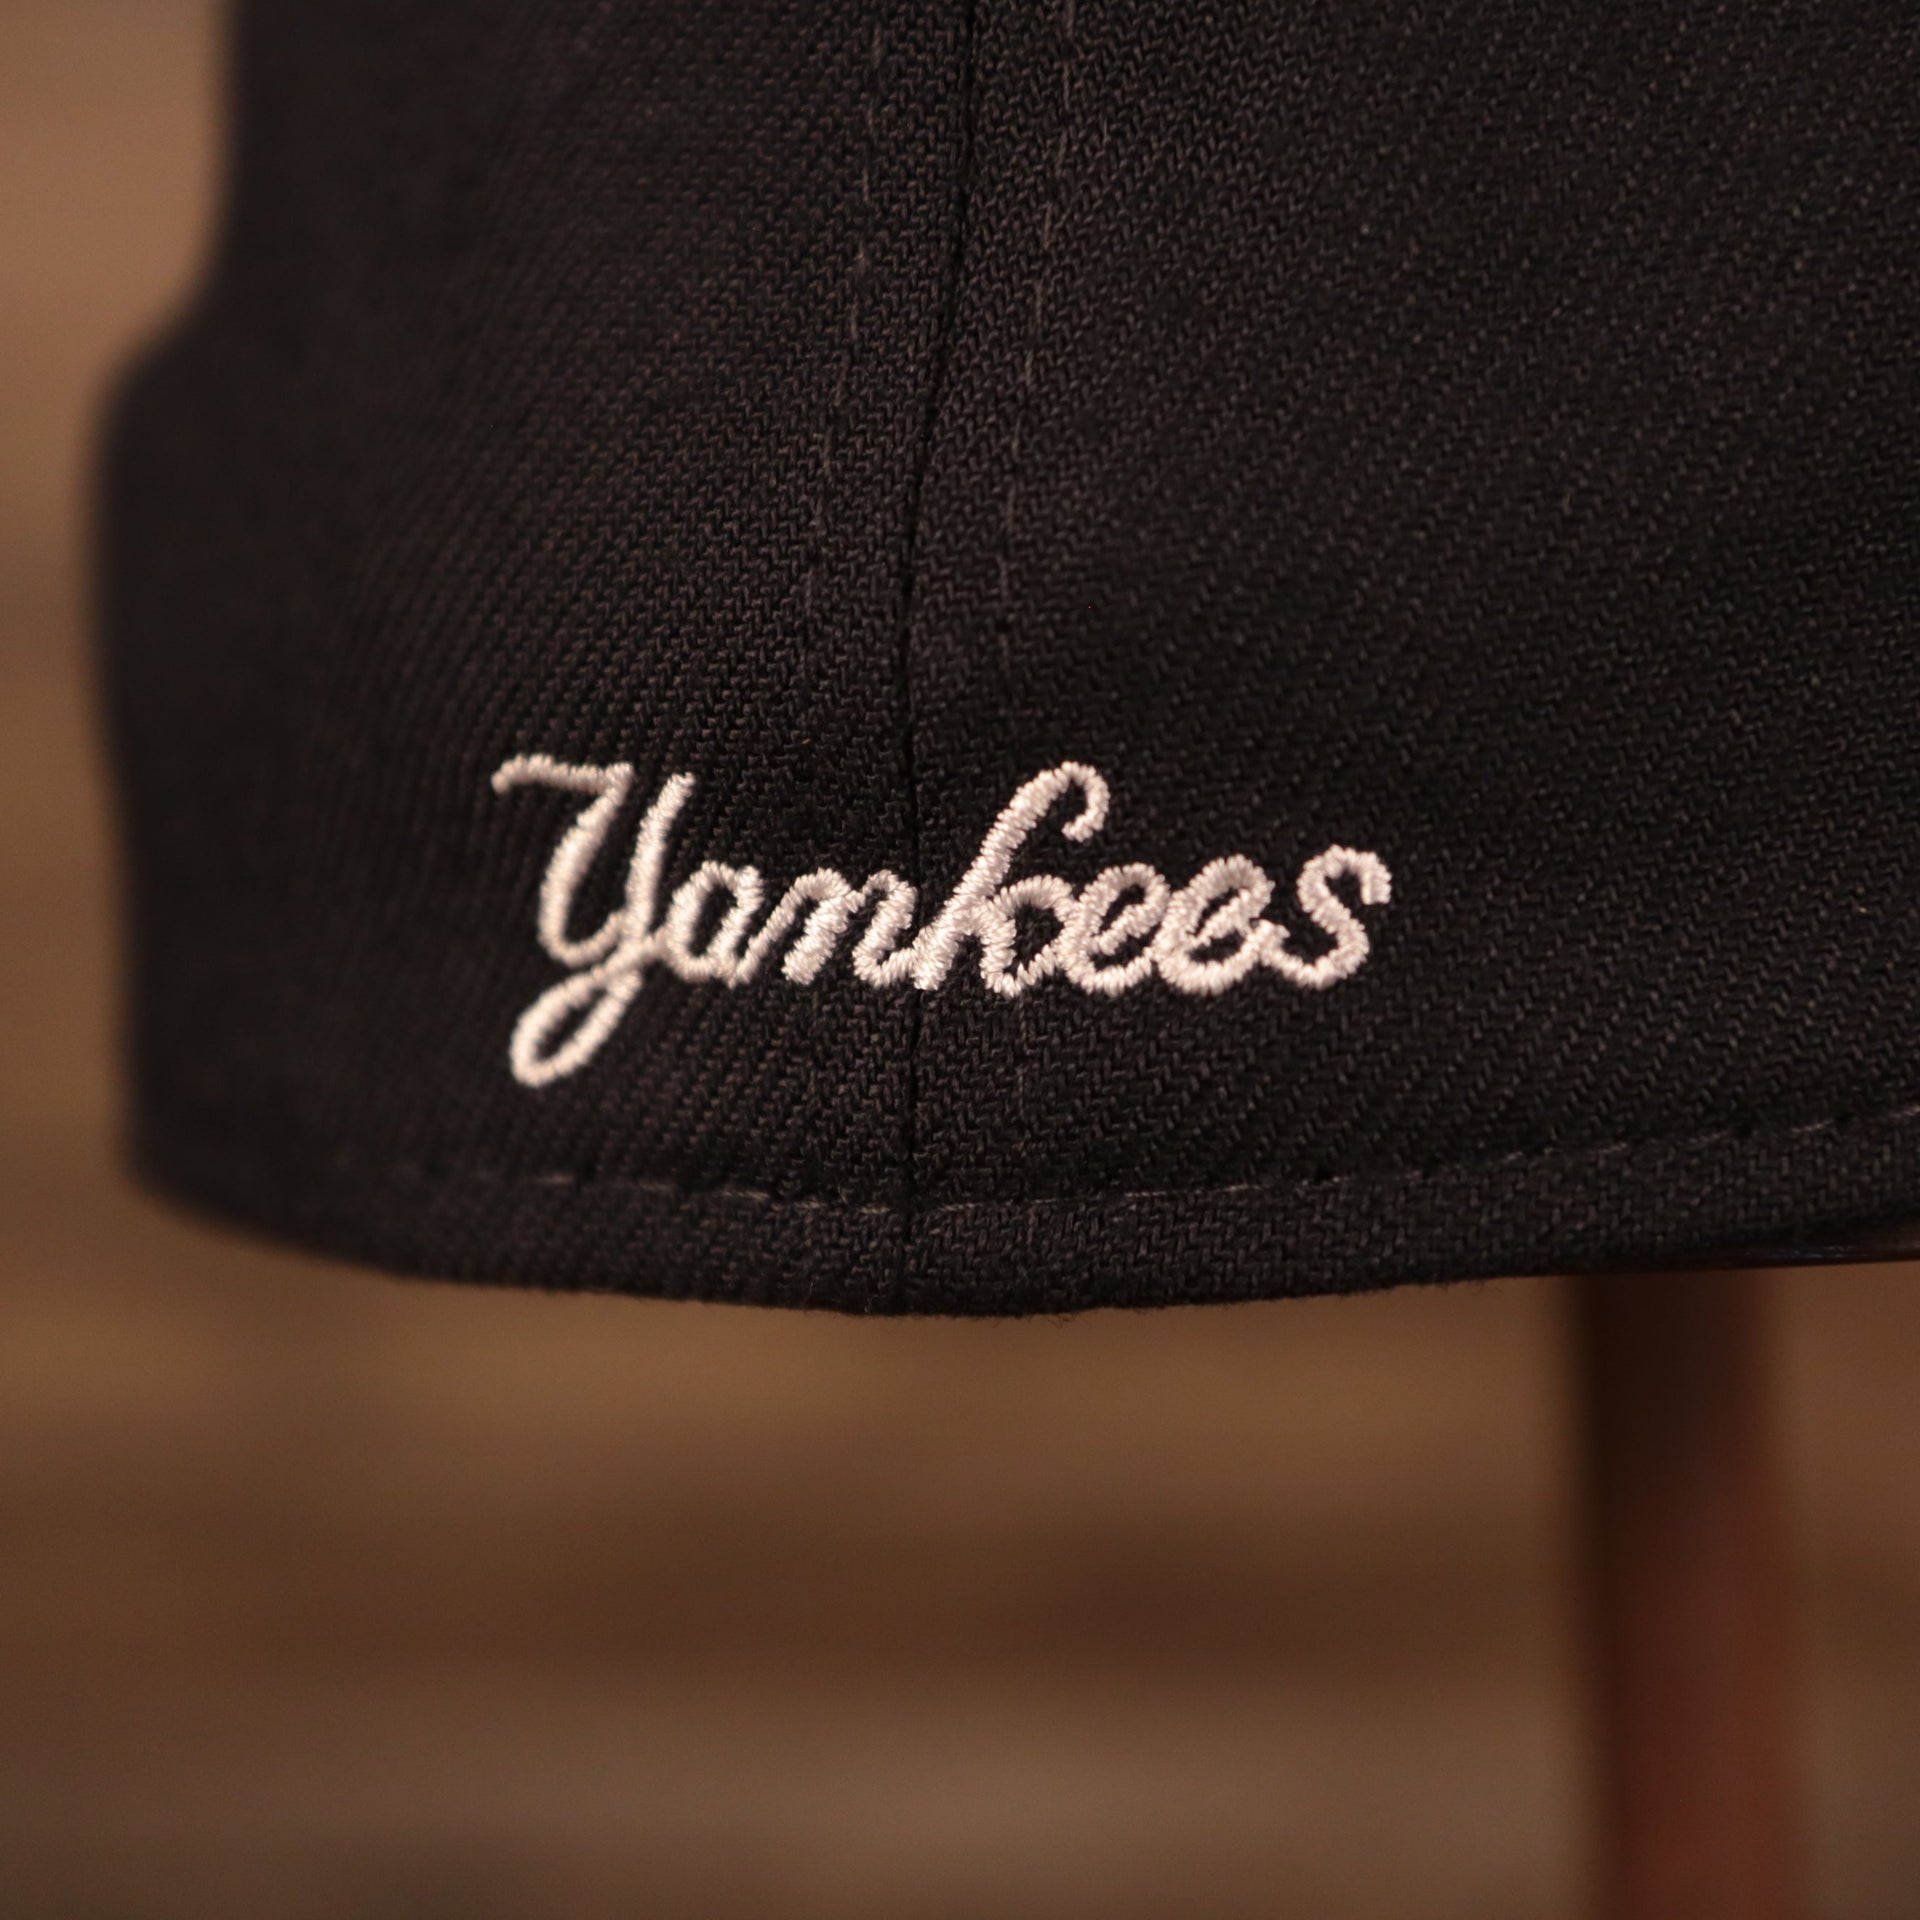 A close up of the Yankees patch on the backside of the navy blue New York Yankees MLB fathers day hats by New Era.